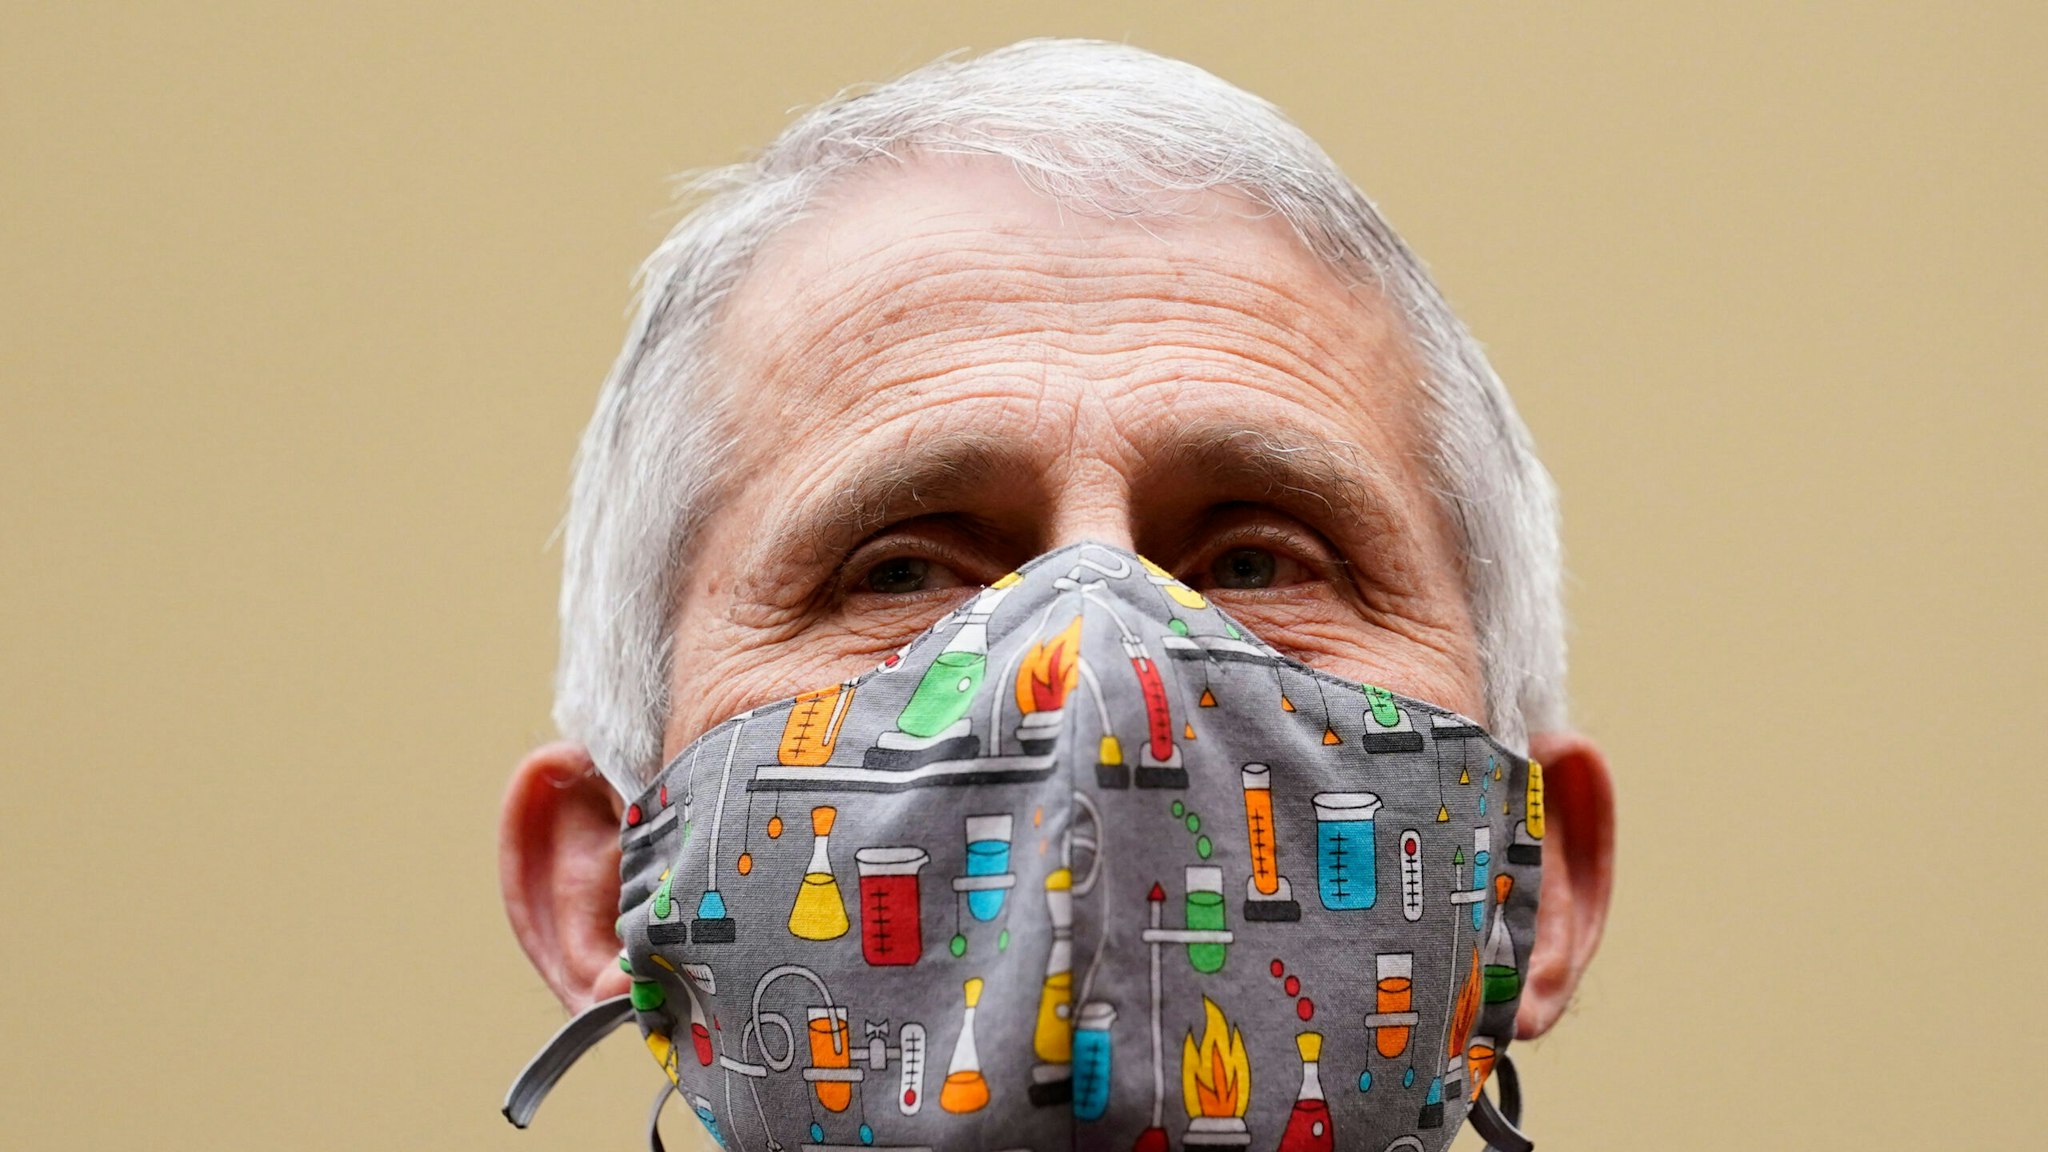 Dr. Anthony Fauci, the nation's top infectious disease expert testifies before a House Select Subcommittee hearing on "Reaching the Light at the End of the Tunnel: A Science-Driven Approach to Swiftly and Safely Ending the Pandemic," on Capitol Hill in Washington, DC, April 15, 2021.